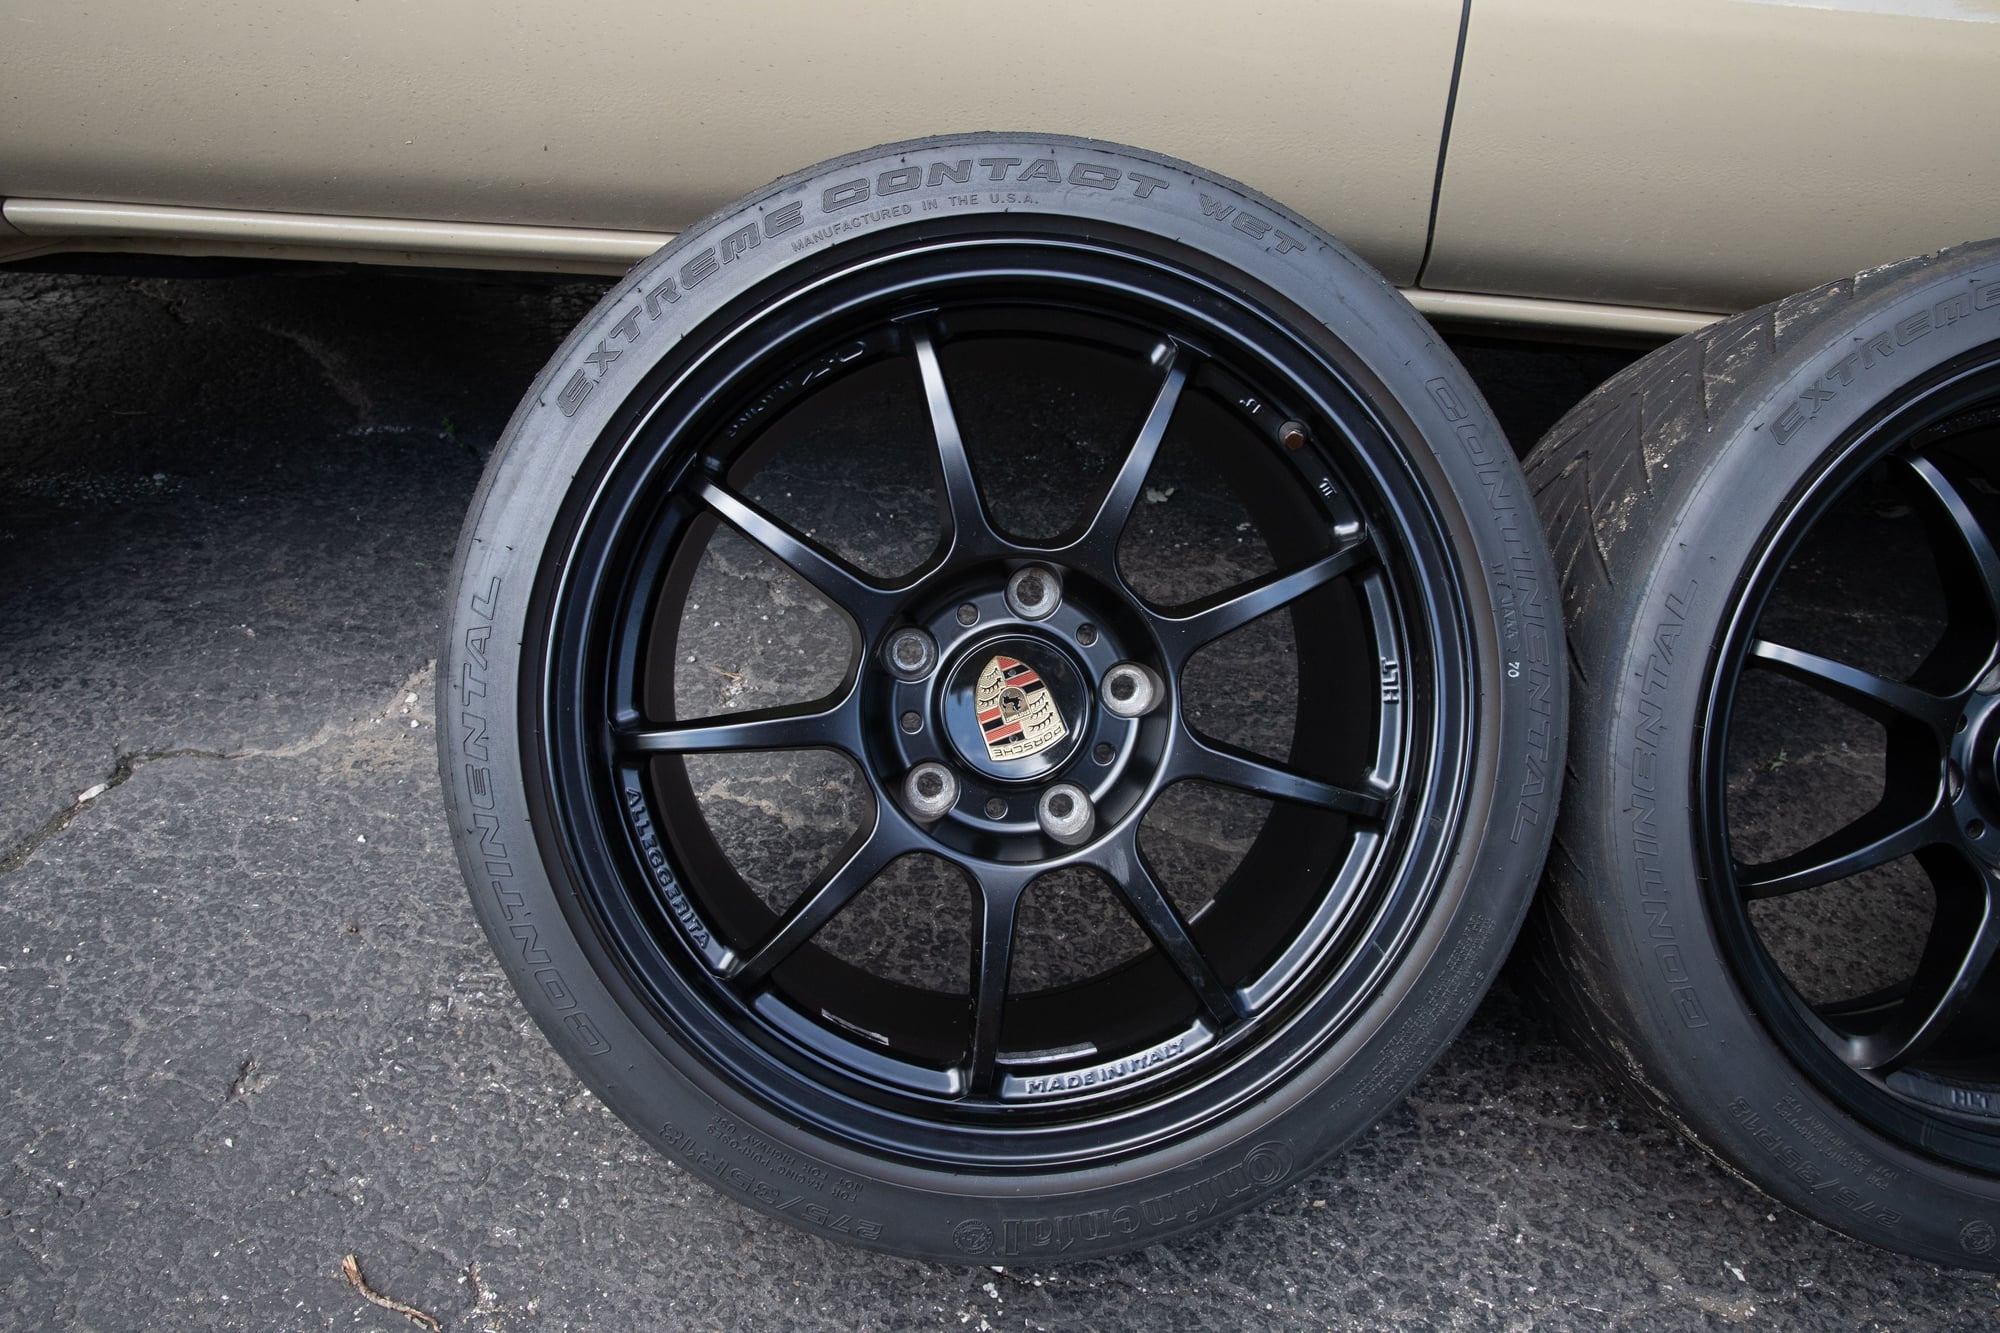 Wheels and Tires/Axles - OZ Racing Alleggerita 18" wheels and slicks - 996/997 - Used - 1999 to 2010 Porsche 911 - Bloomington, IN 47403, United States